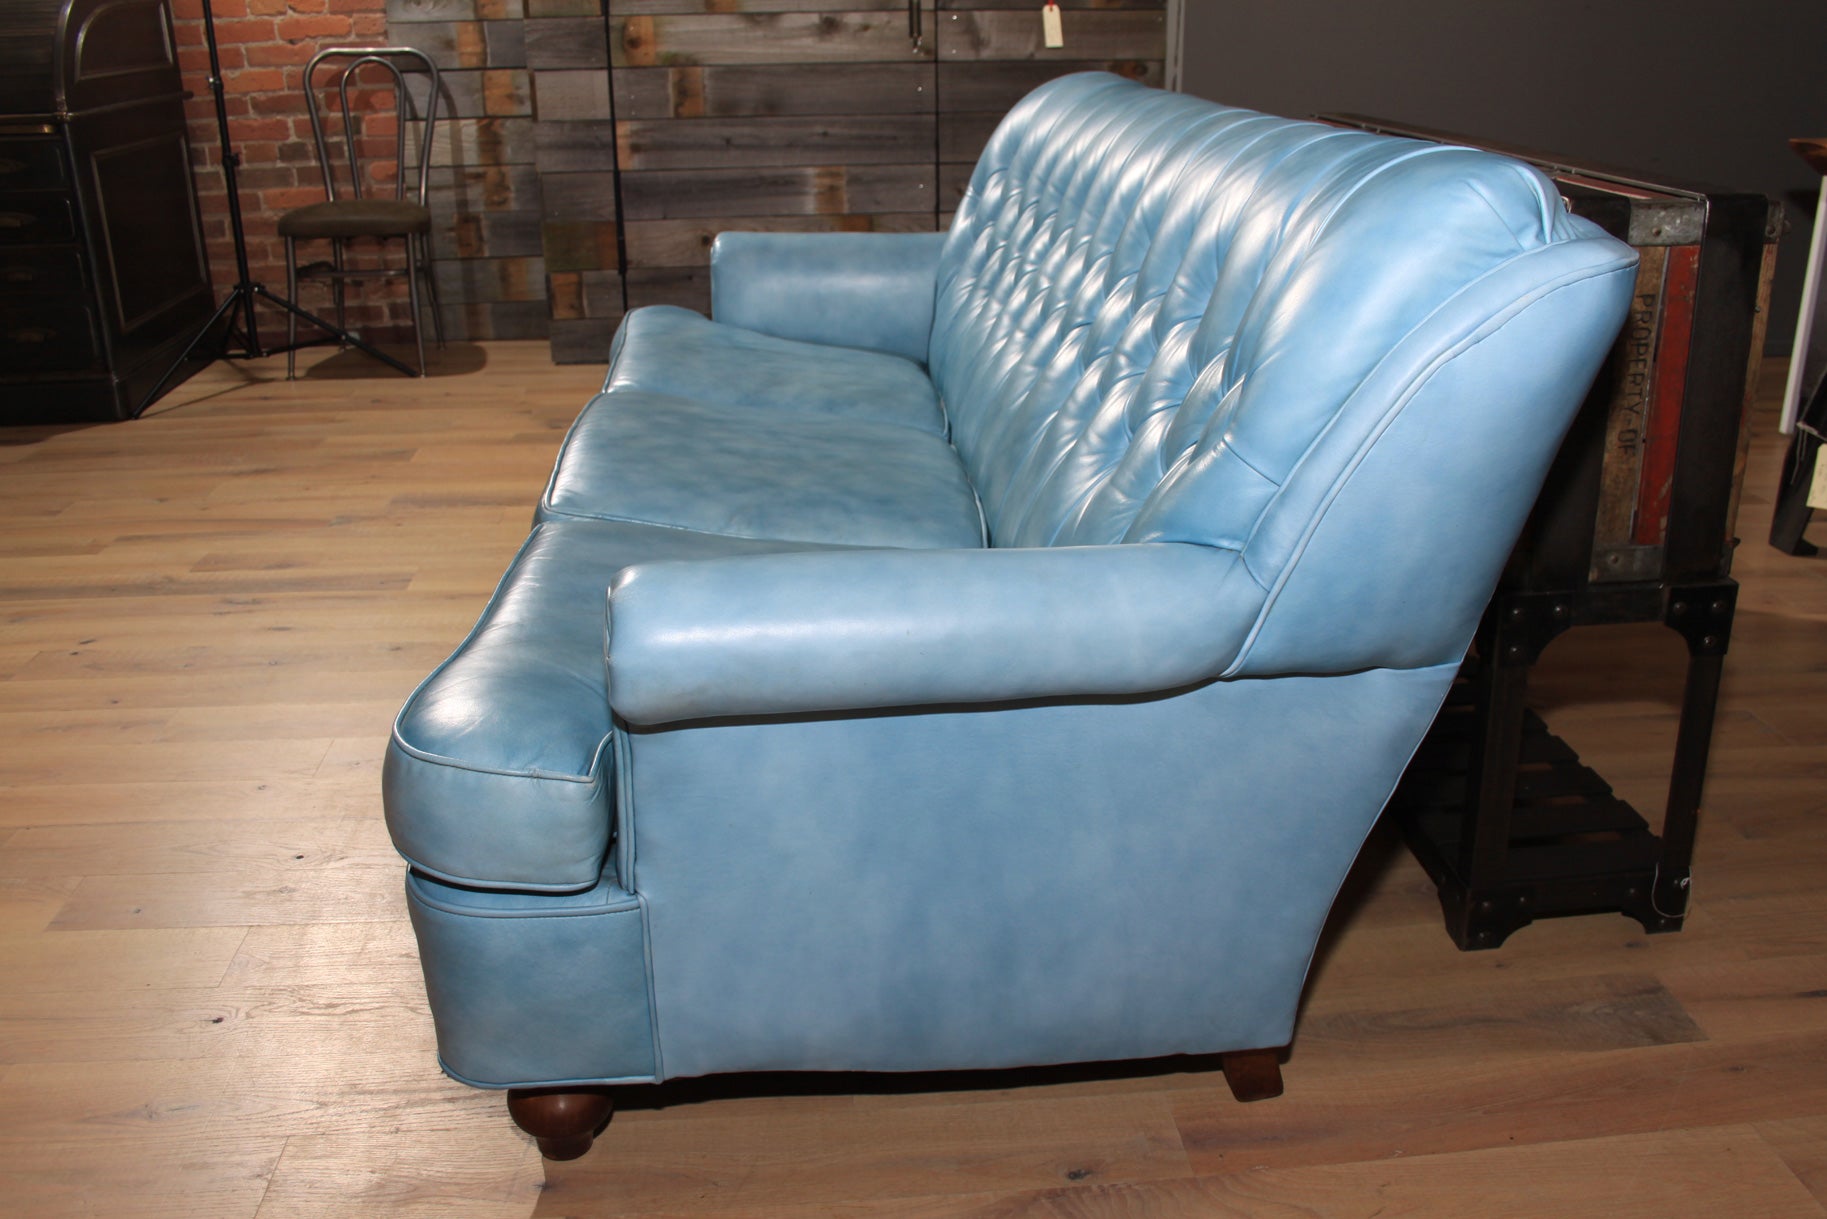 The coolest blue leather sofa 1